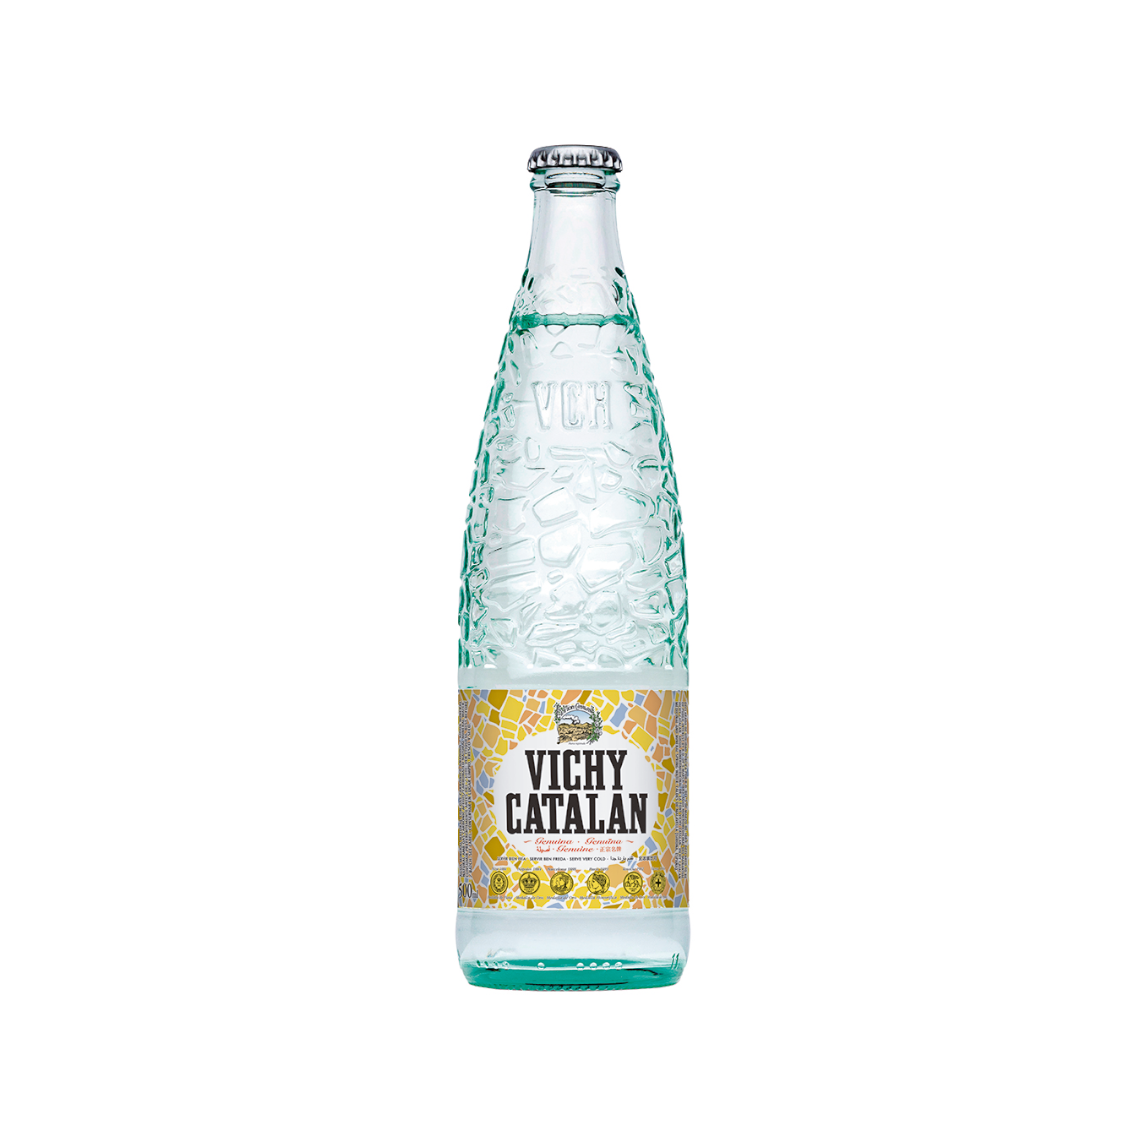 Vichy Catalan Sparkling Mineral Water 1L Spain